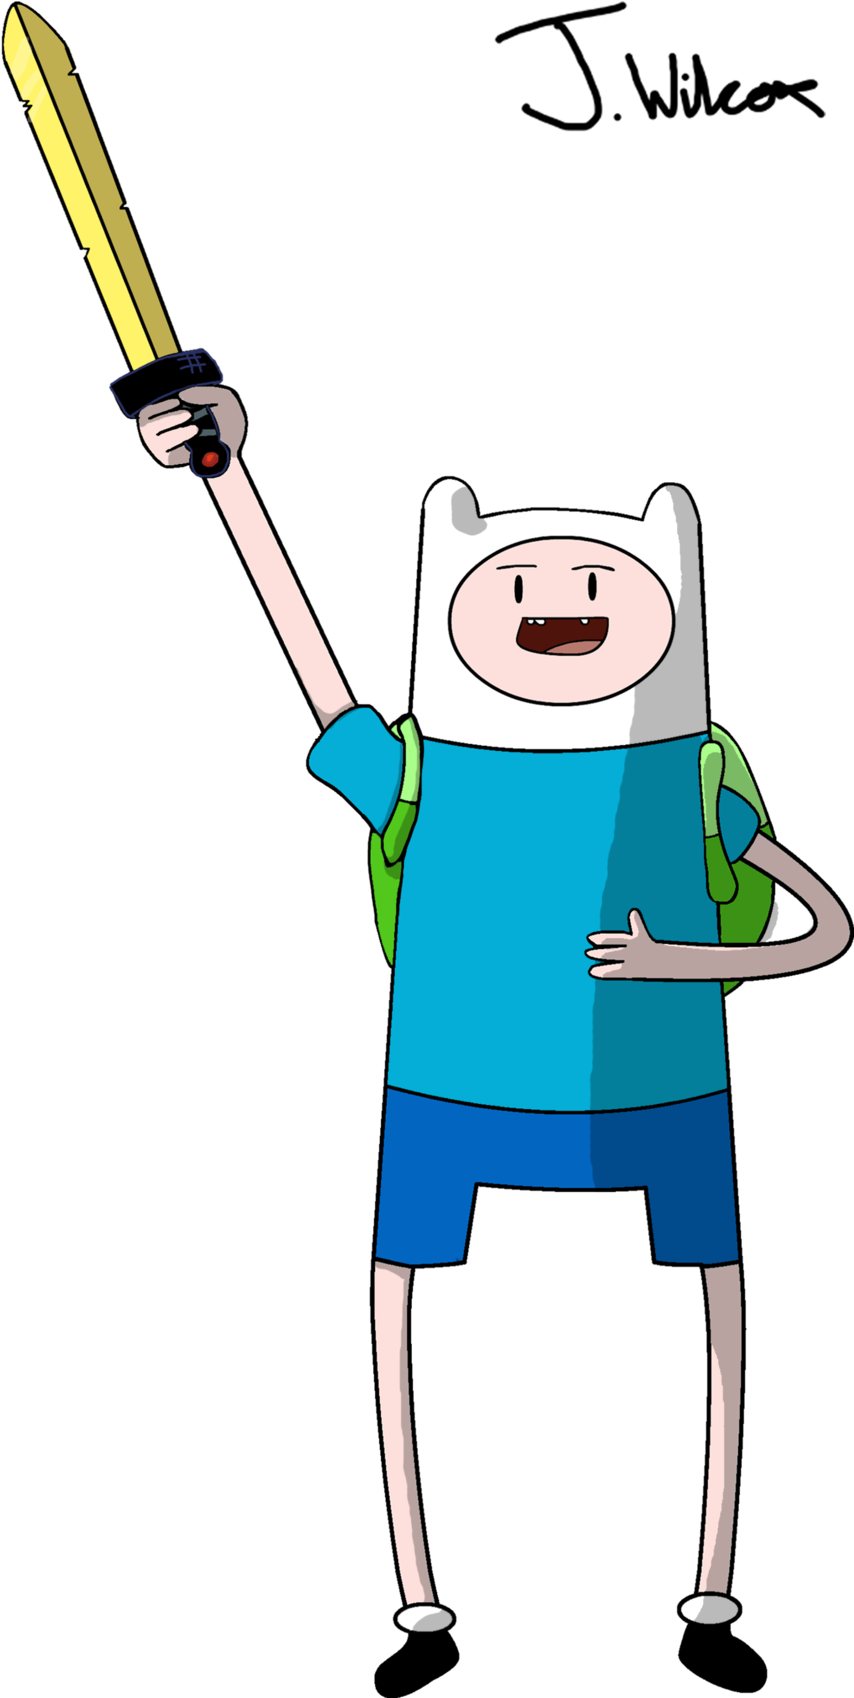 Make Sure To Clean Your Wall With A Dry Cloth/towel - Finn The Human Adventure Time (900x1714)